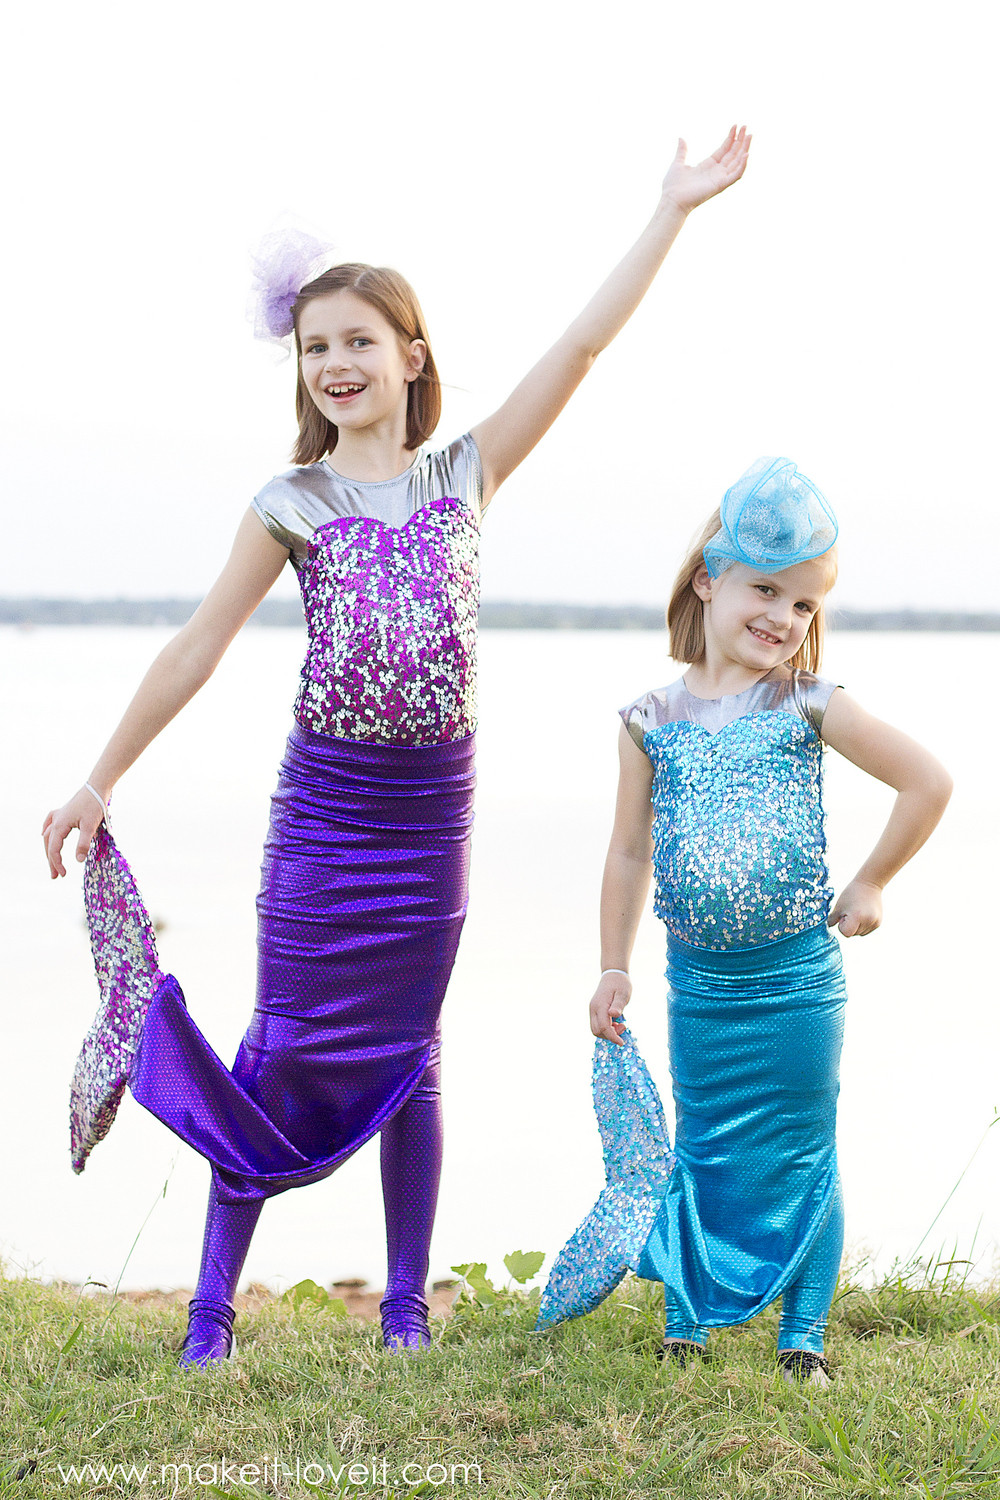 DIY Mermaid Costume Toddler
 DIY Mermaid Costume with a REPOSITIONABLE Fin